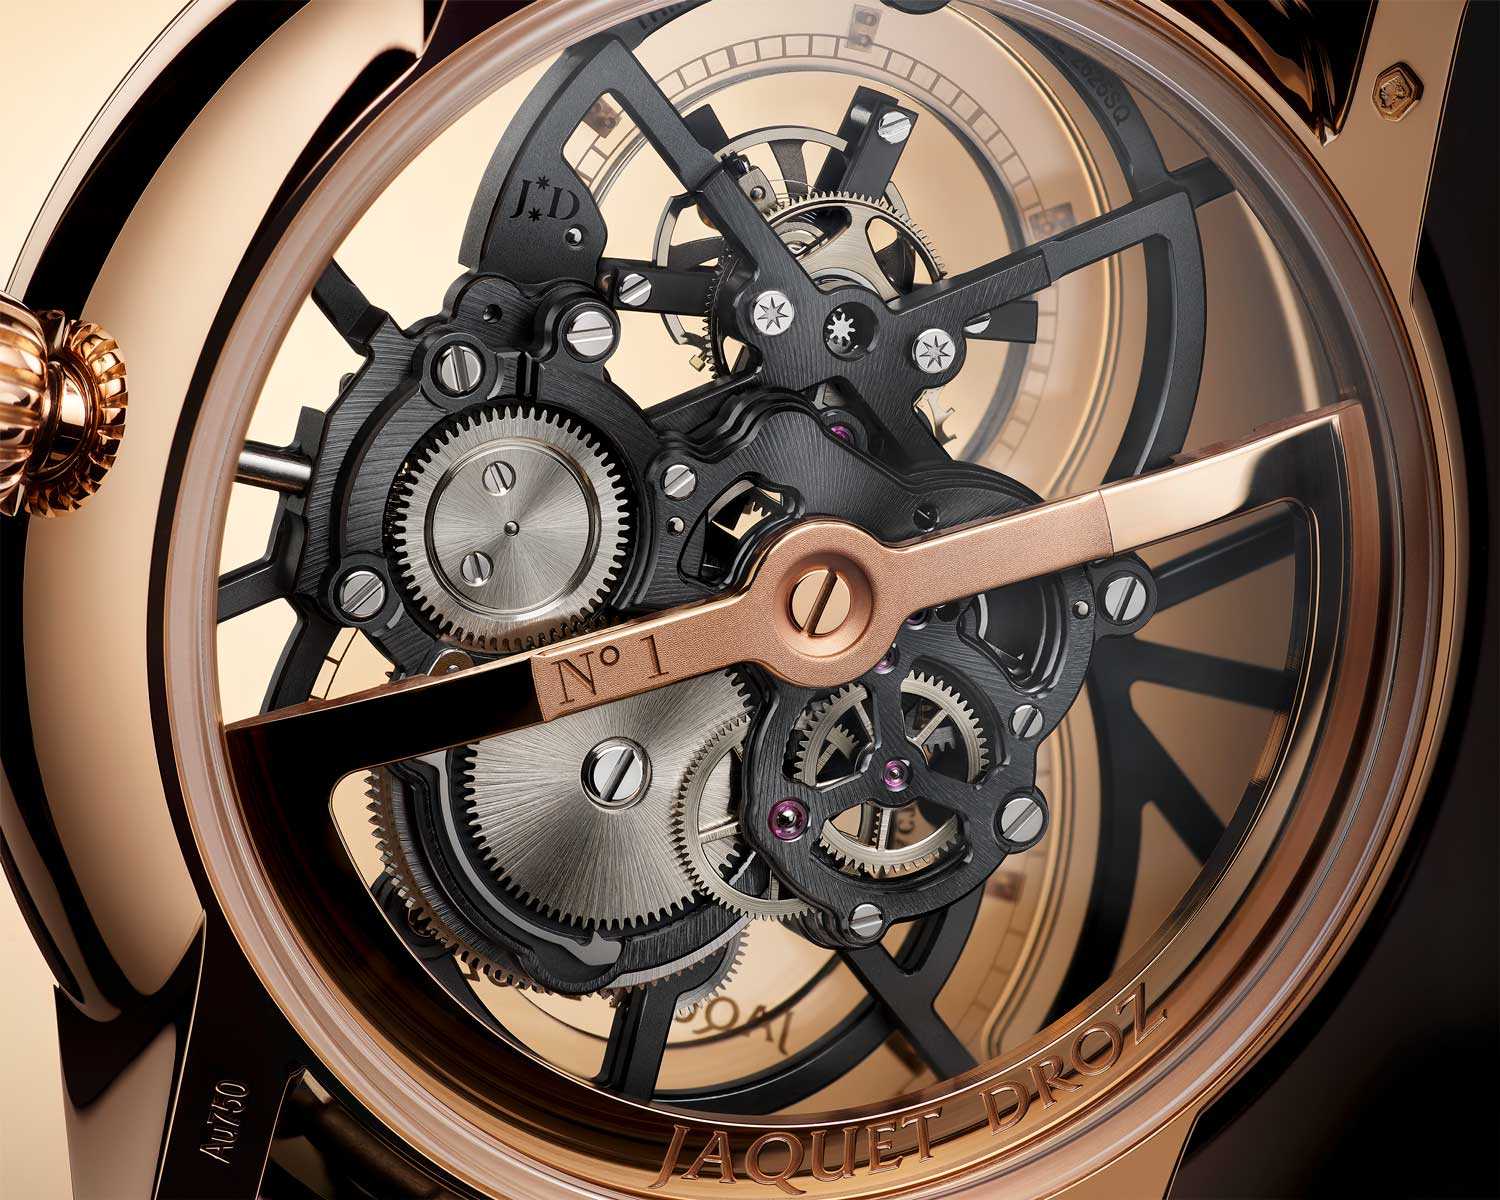 The 18k red gold oscillating weight is skeletonized to provide a visual illusion wherein it is visible from the case back, yet it is invisible from the dial side